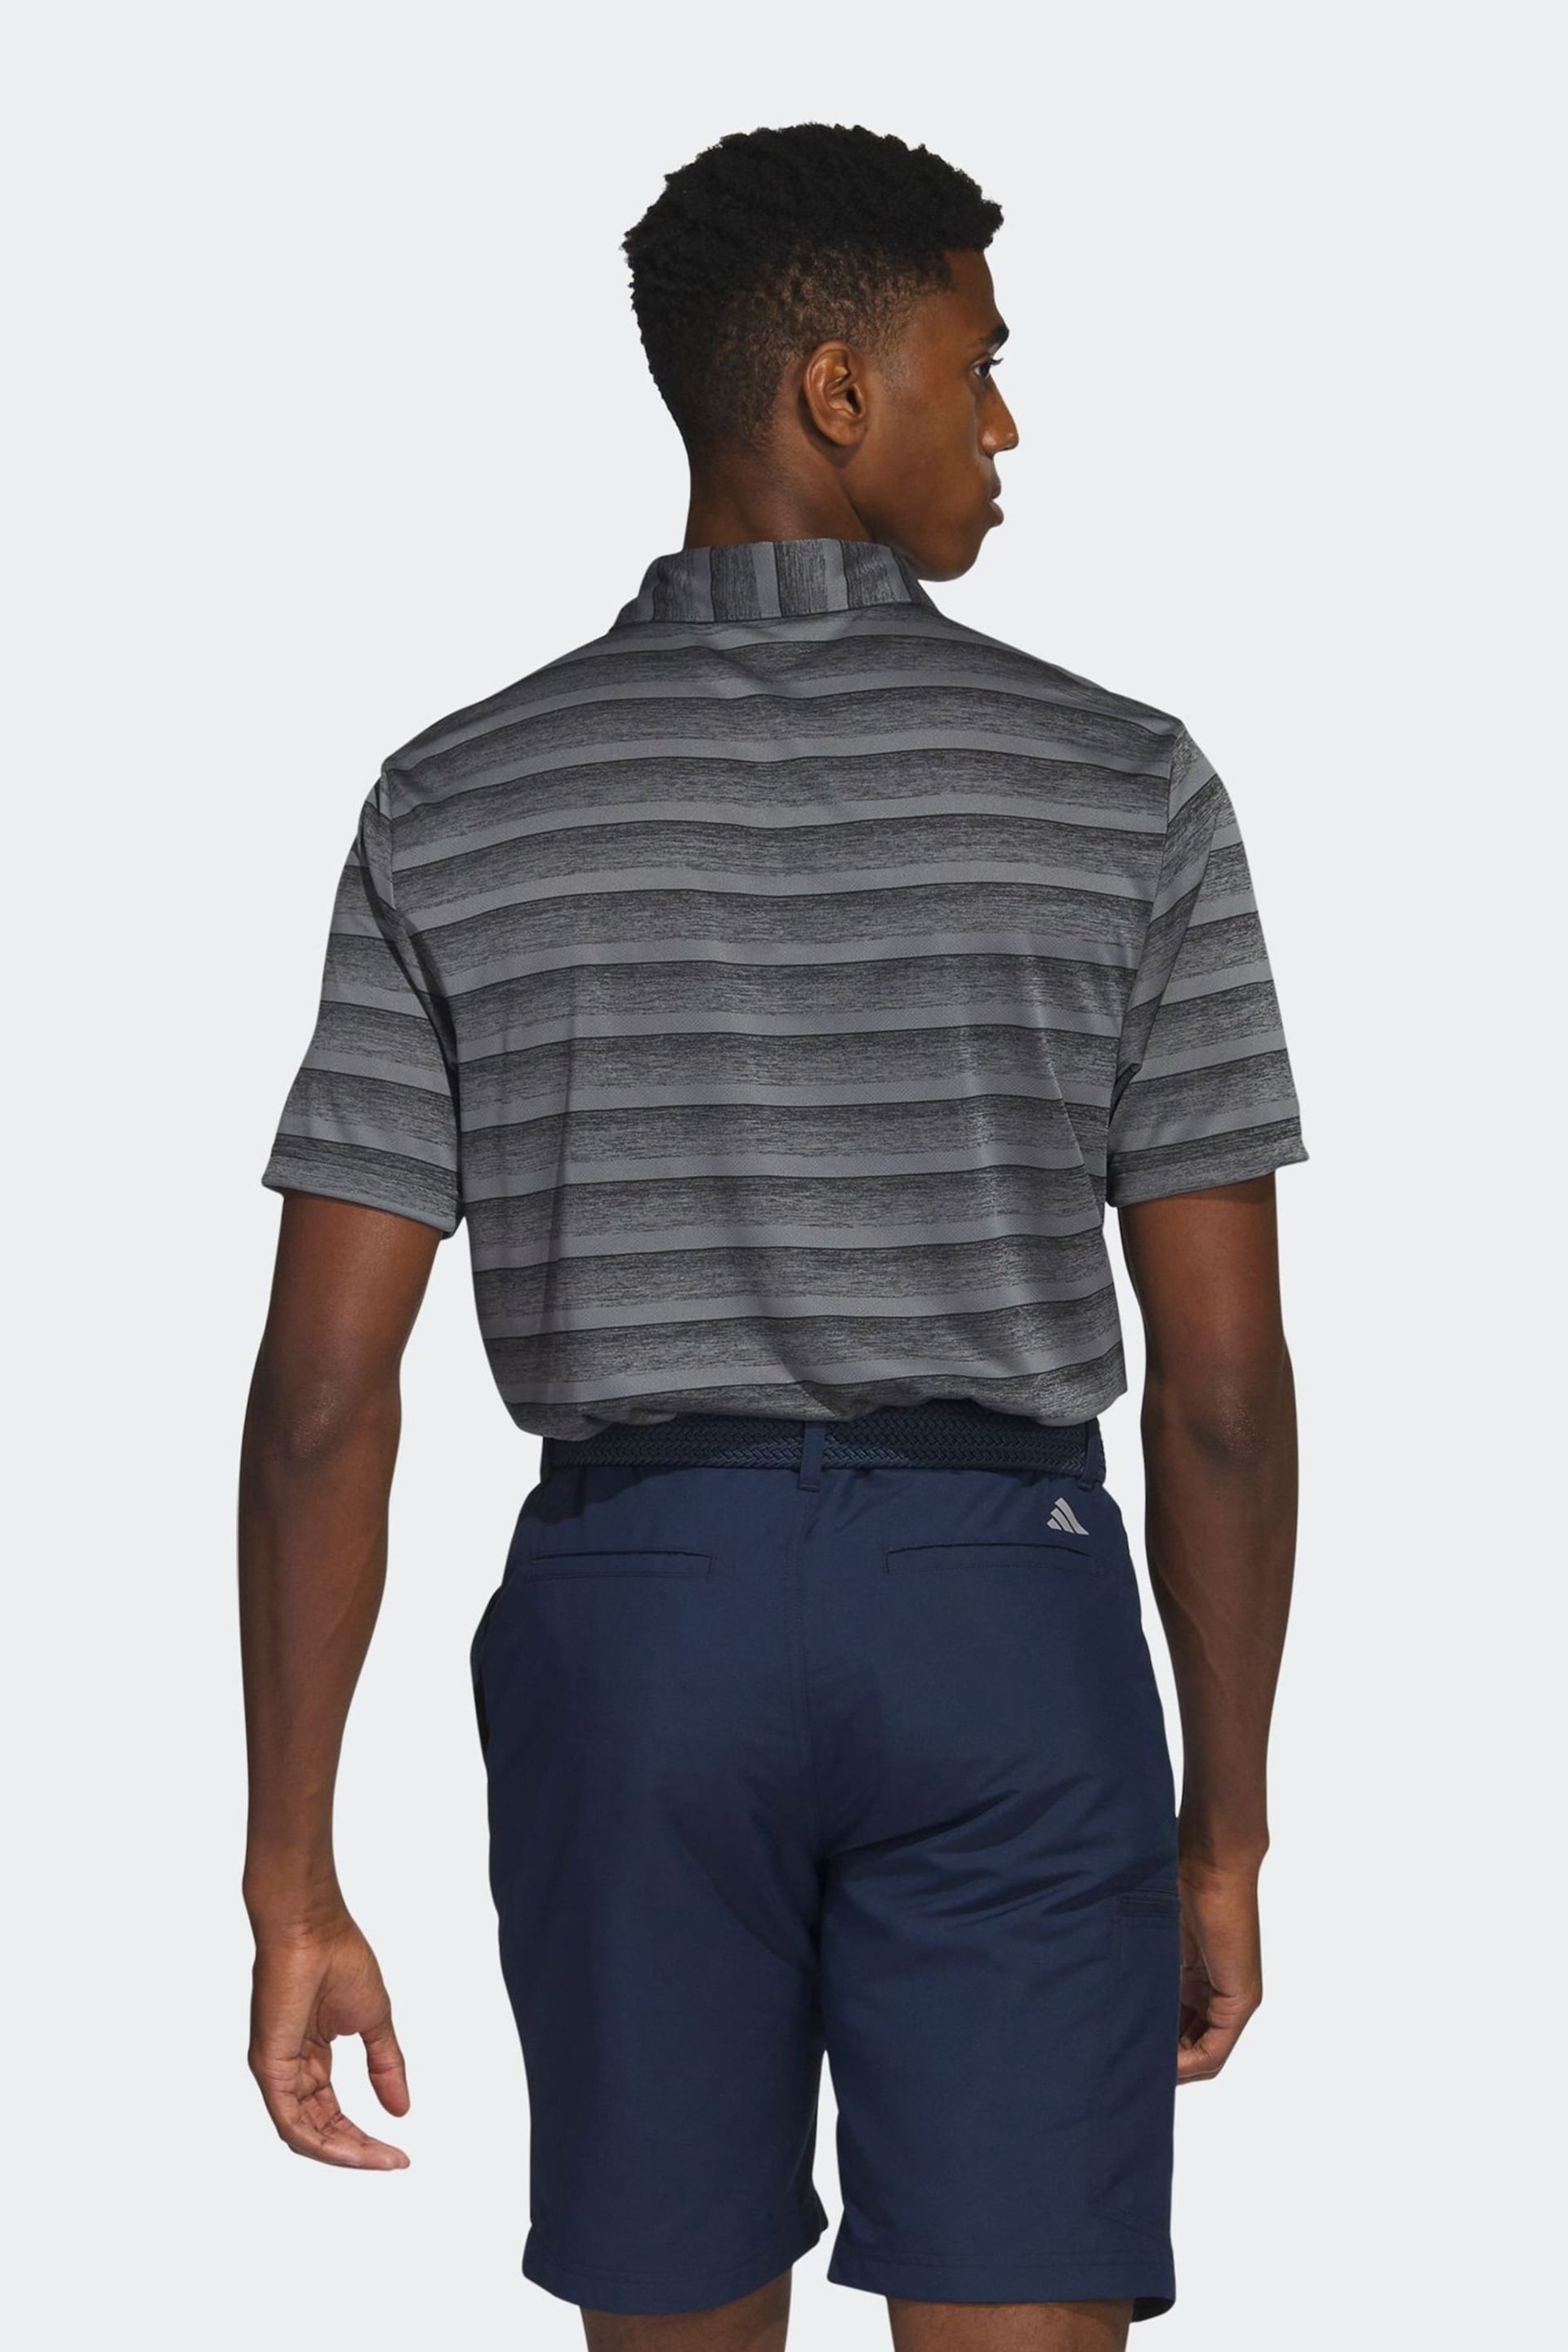 adidas Golf Two Colour Striped Polo Shirt - Image 2 of 5